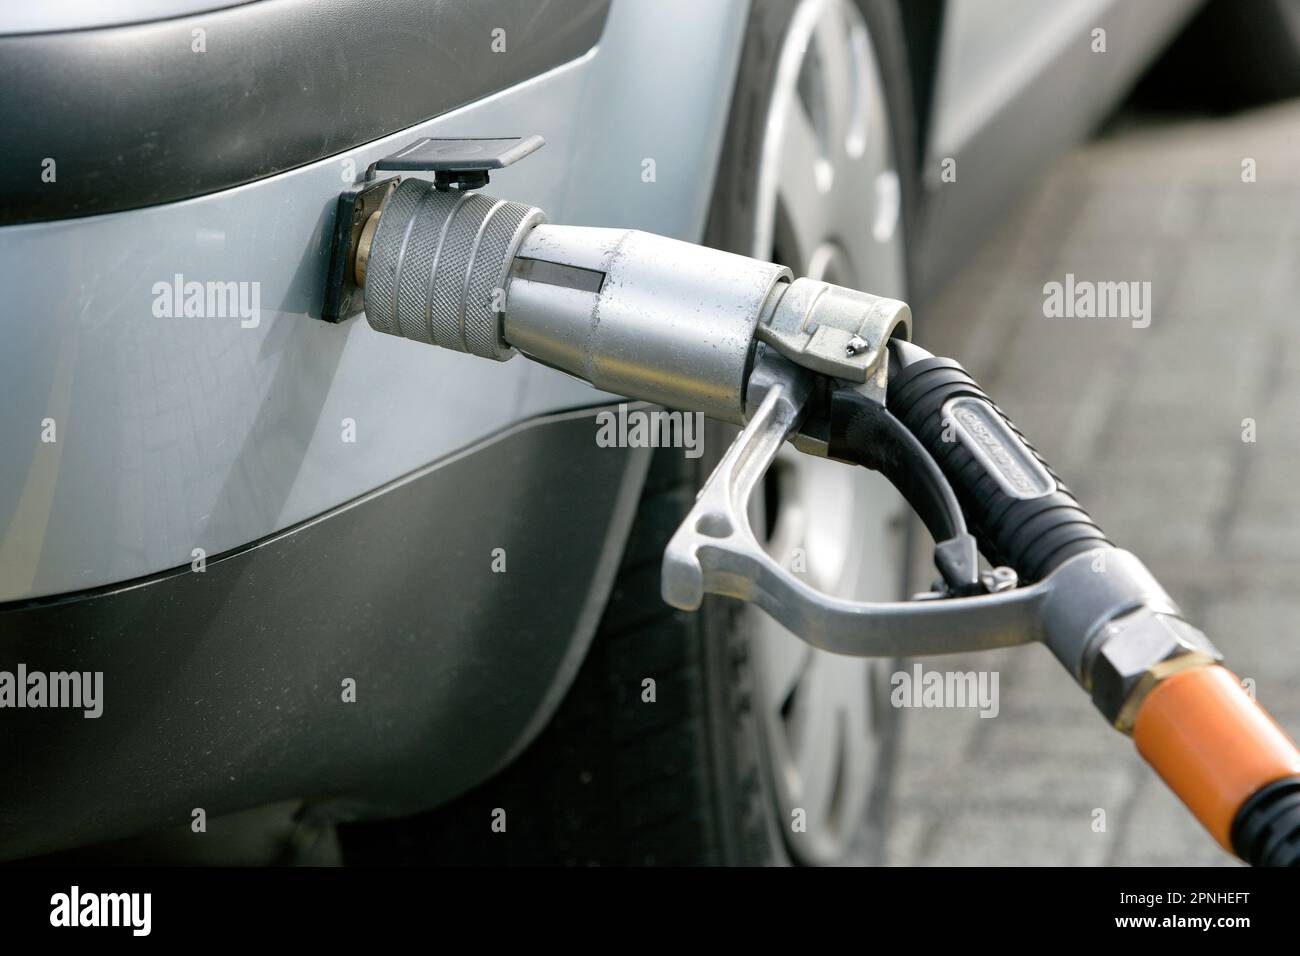 Fuelling a car with LPG Stock Photo